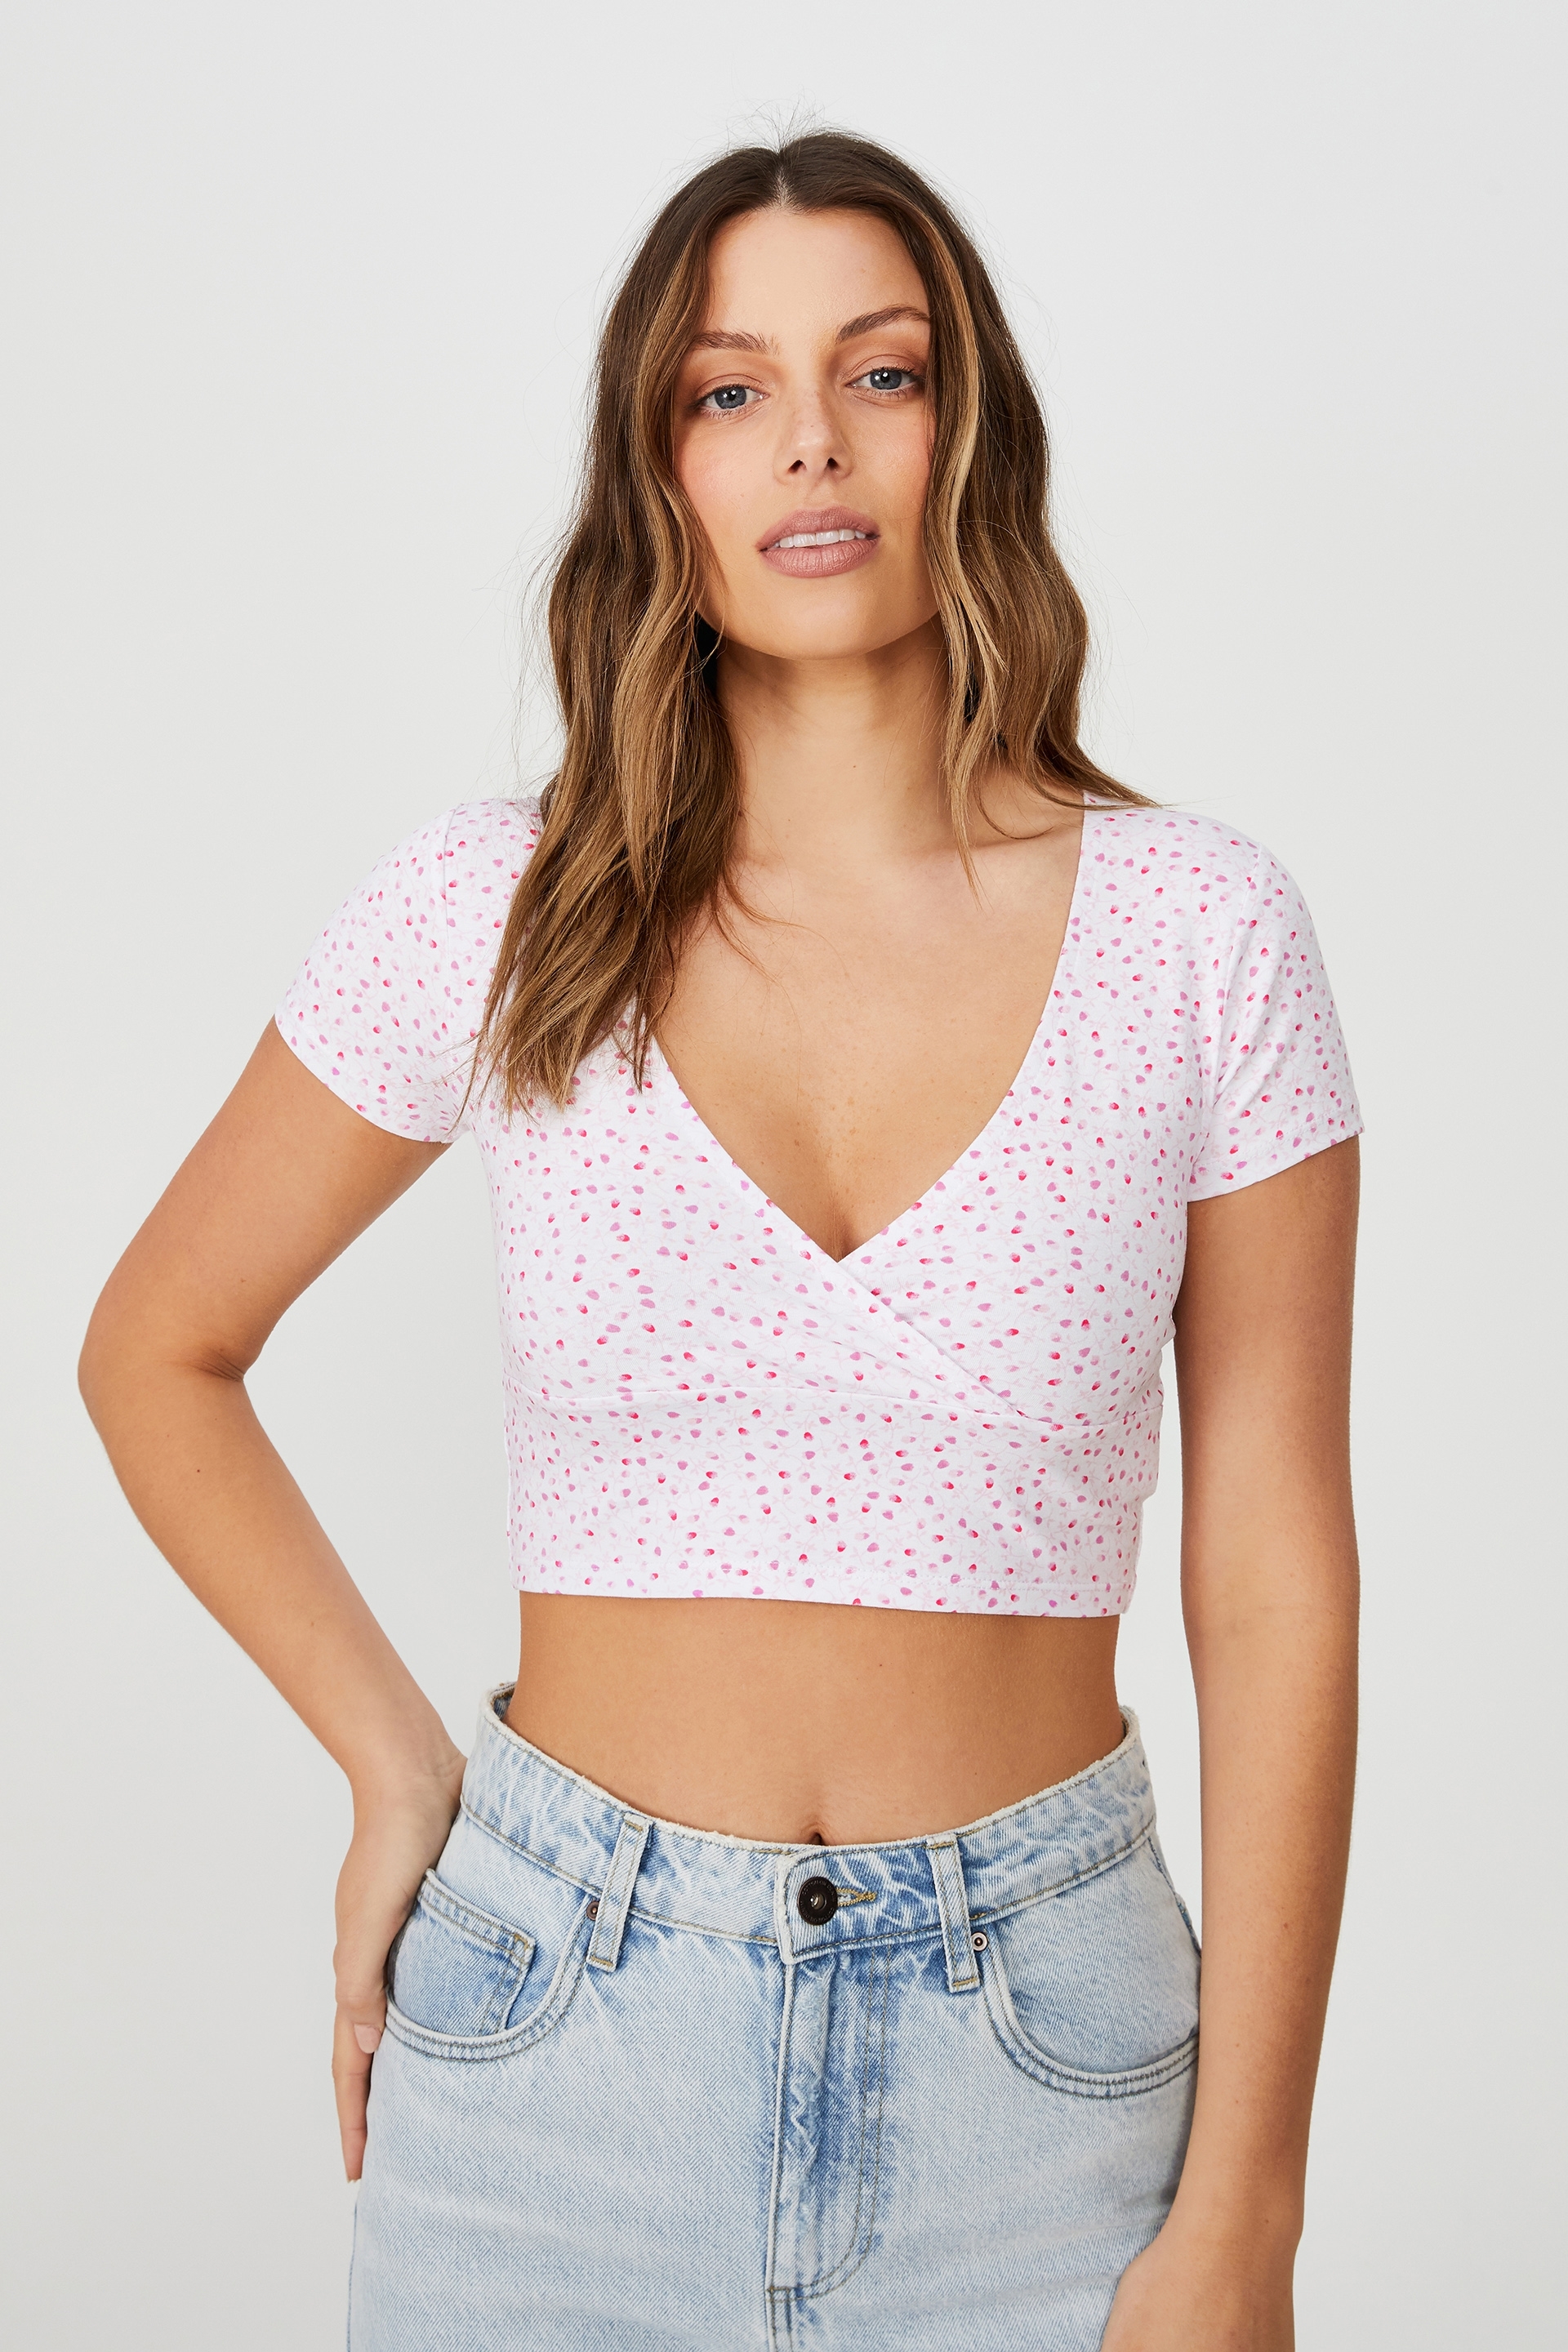 Cotton On Women - Toni Wrap Front Top - Penny ditsy pink cherry blossom